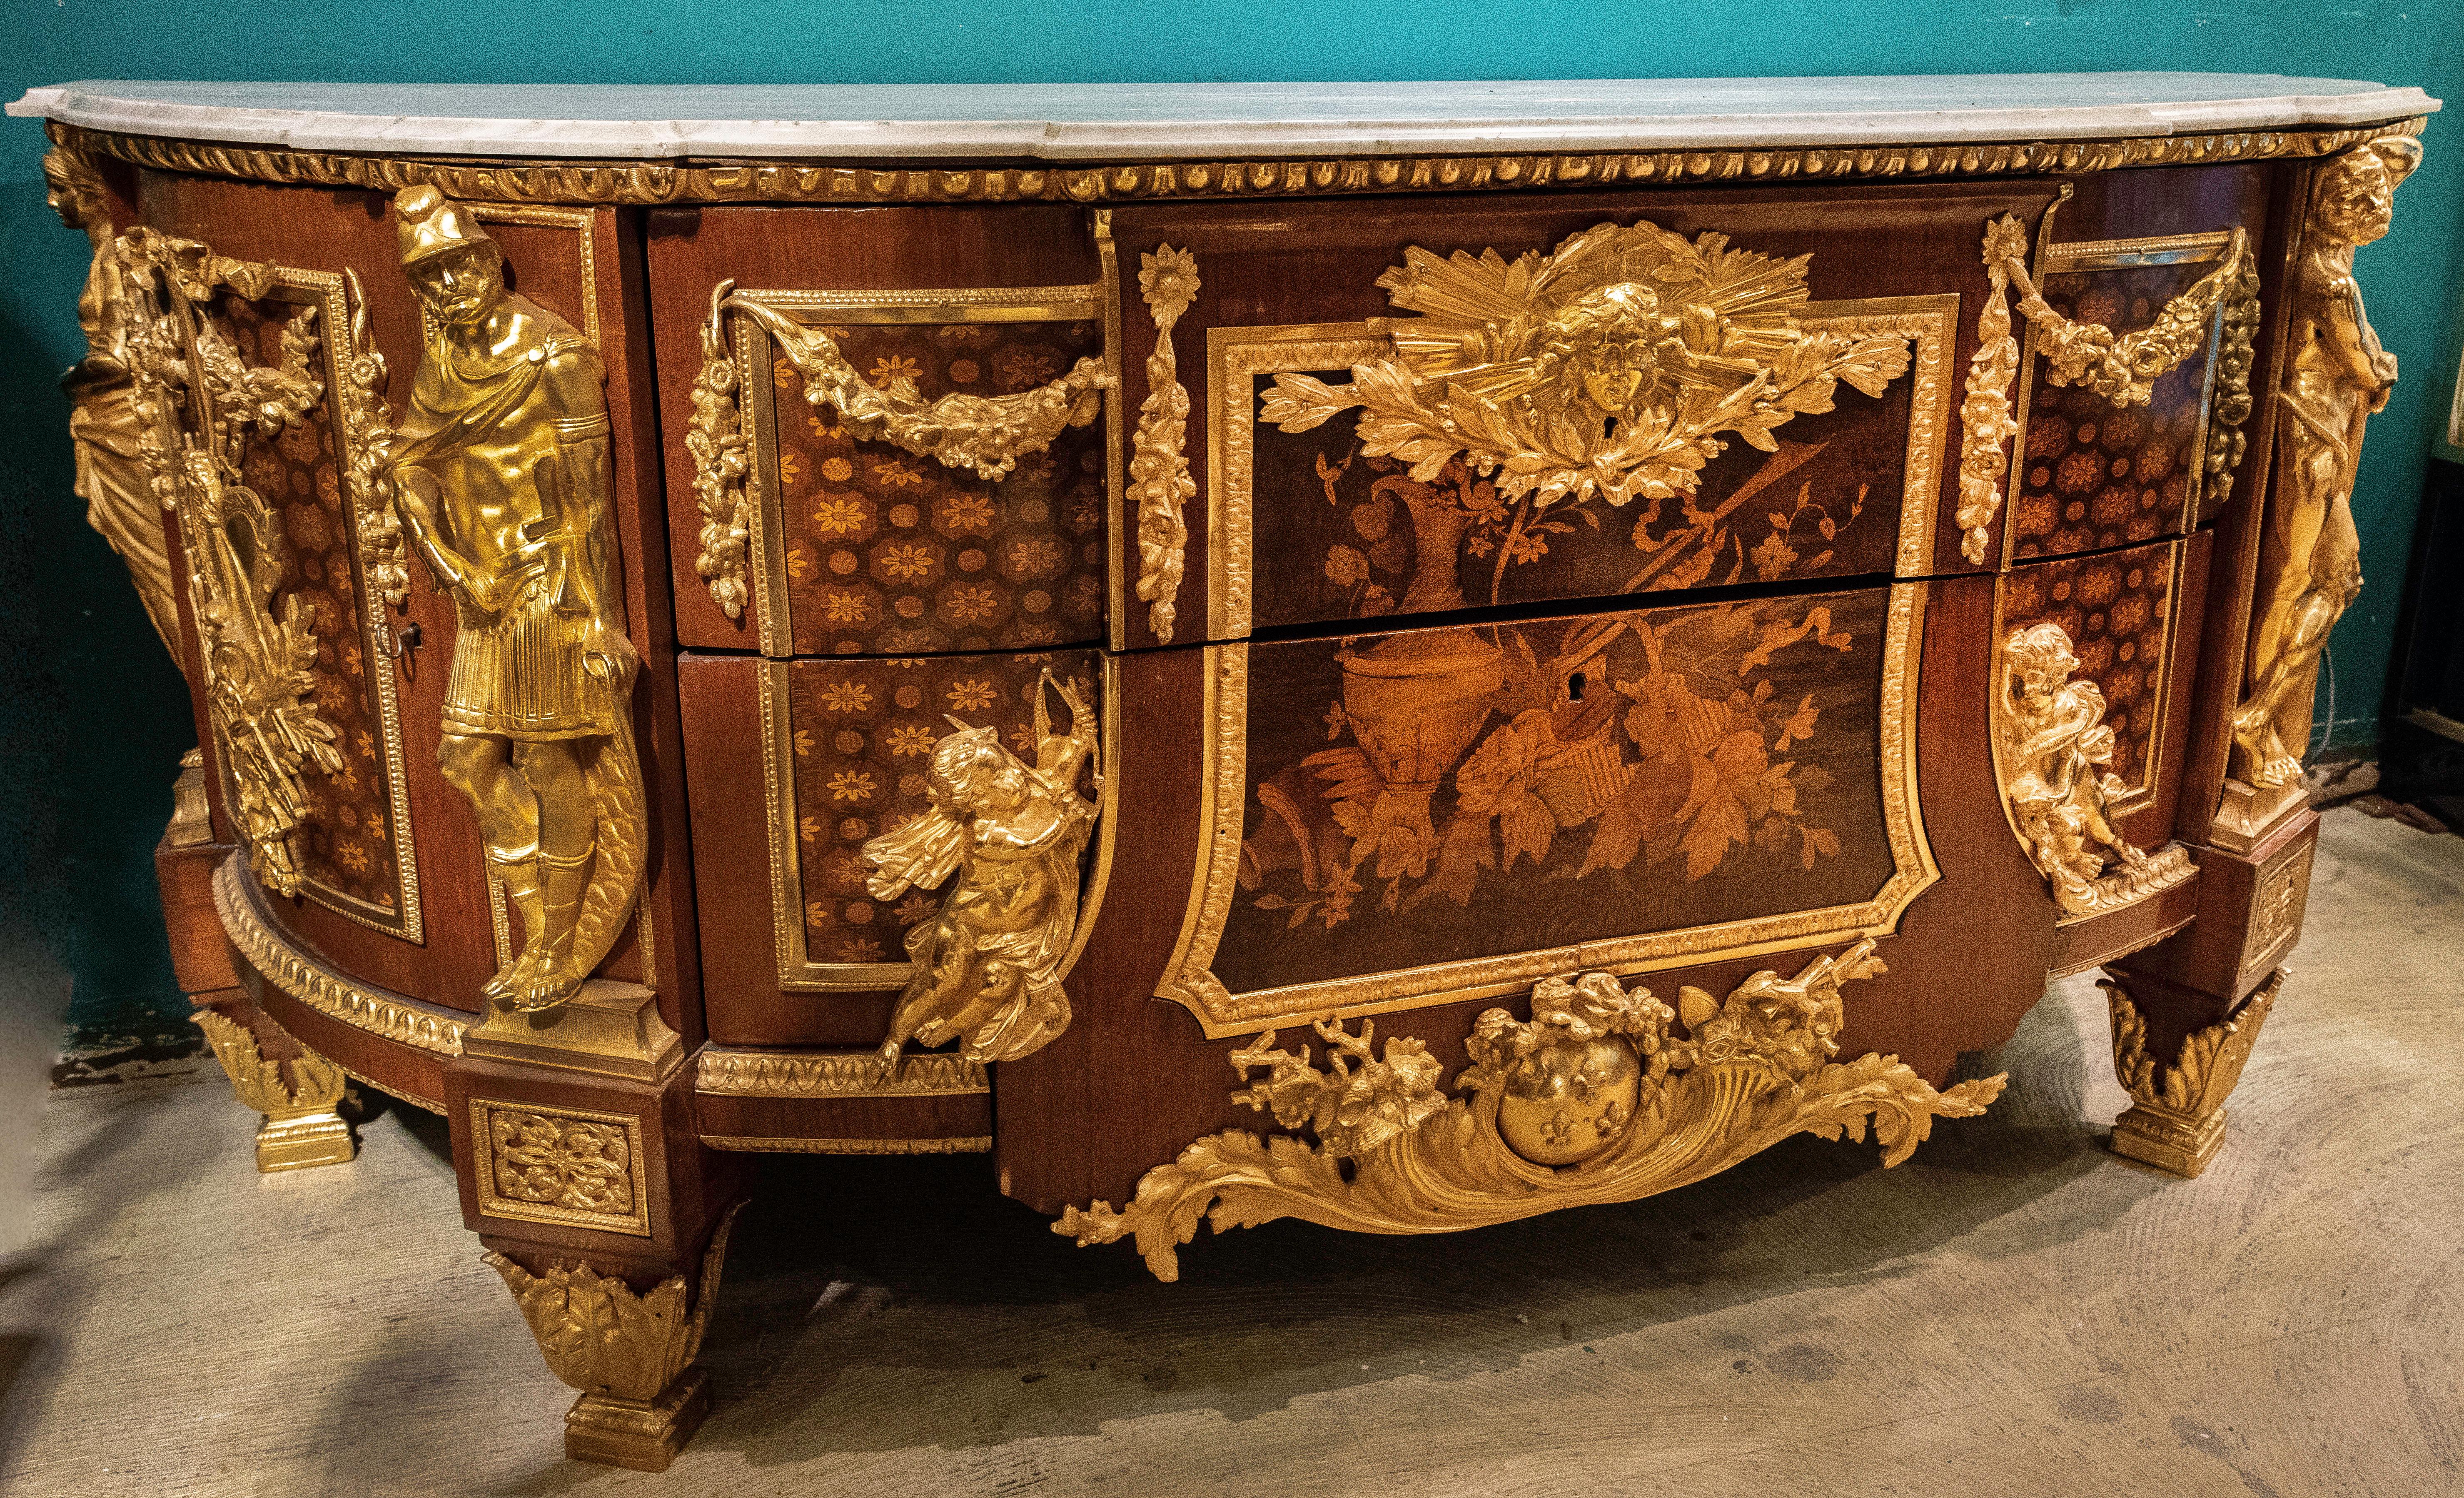 A fine and large French early 20th century Louis XVI style mahogany, kingwood and fruitwood marquetry armorial commode with sycamore marquetry and gilt bronze mounts, after a model of The Commode Commandée Pour La Chambre de Louis XVI à Versailles